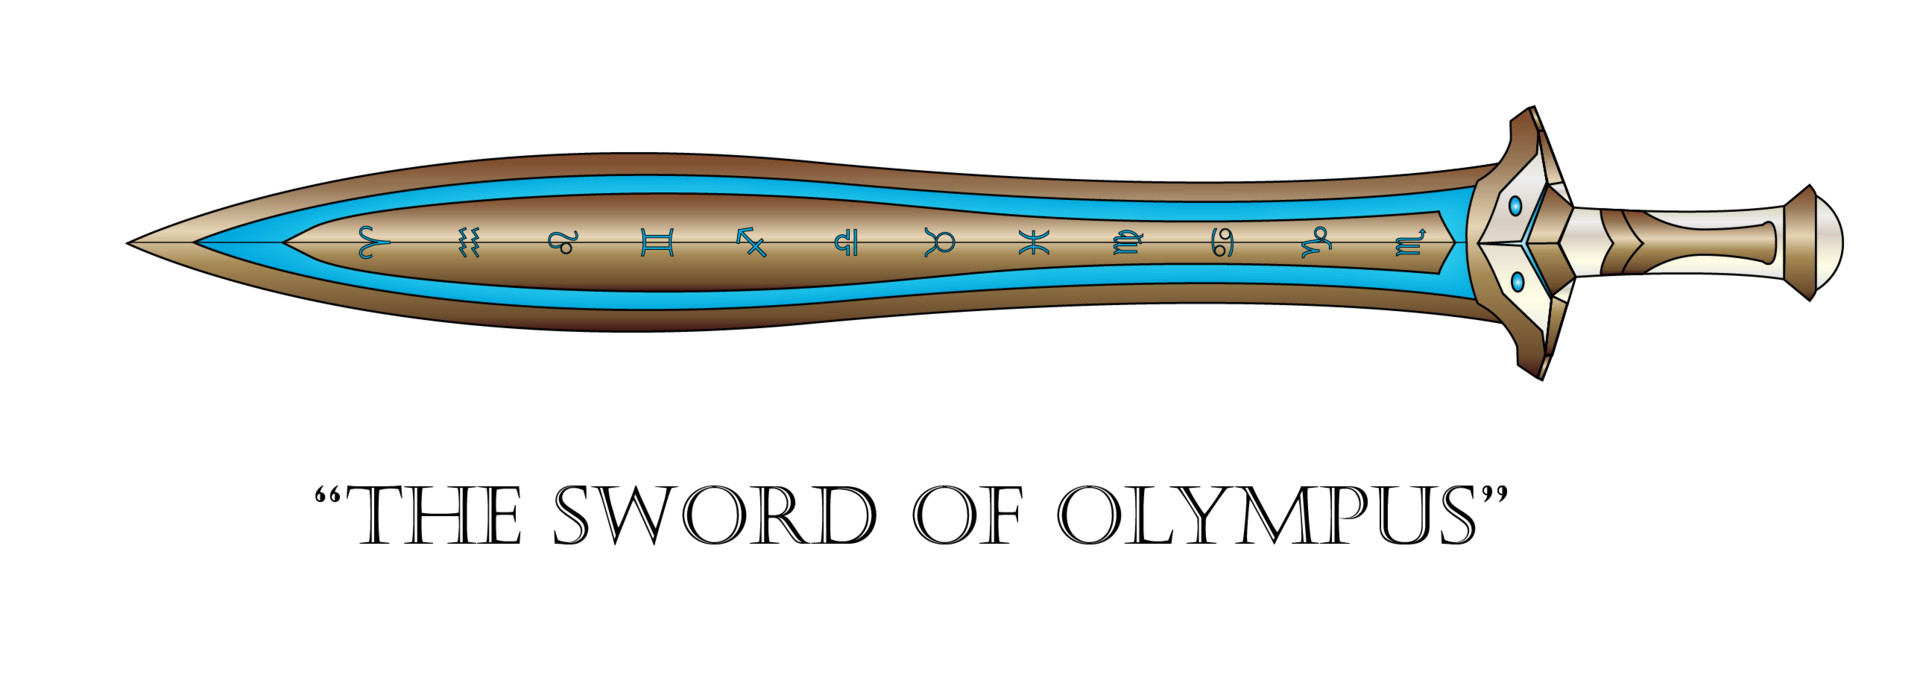 Josh Morris - The Sword of Olympus (Personal Project)